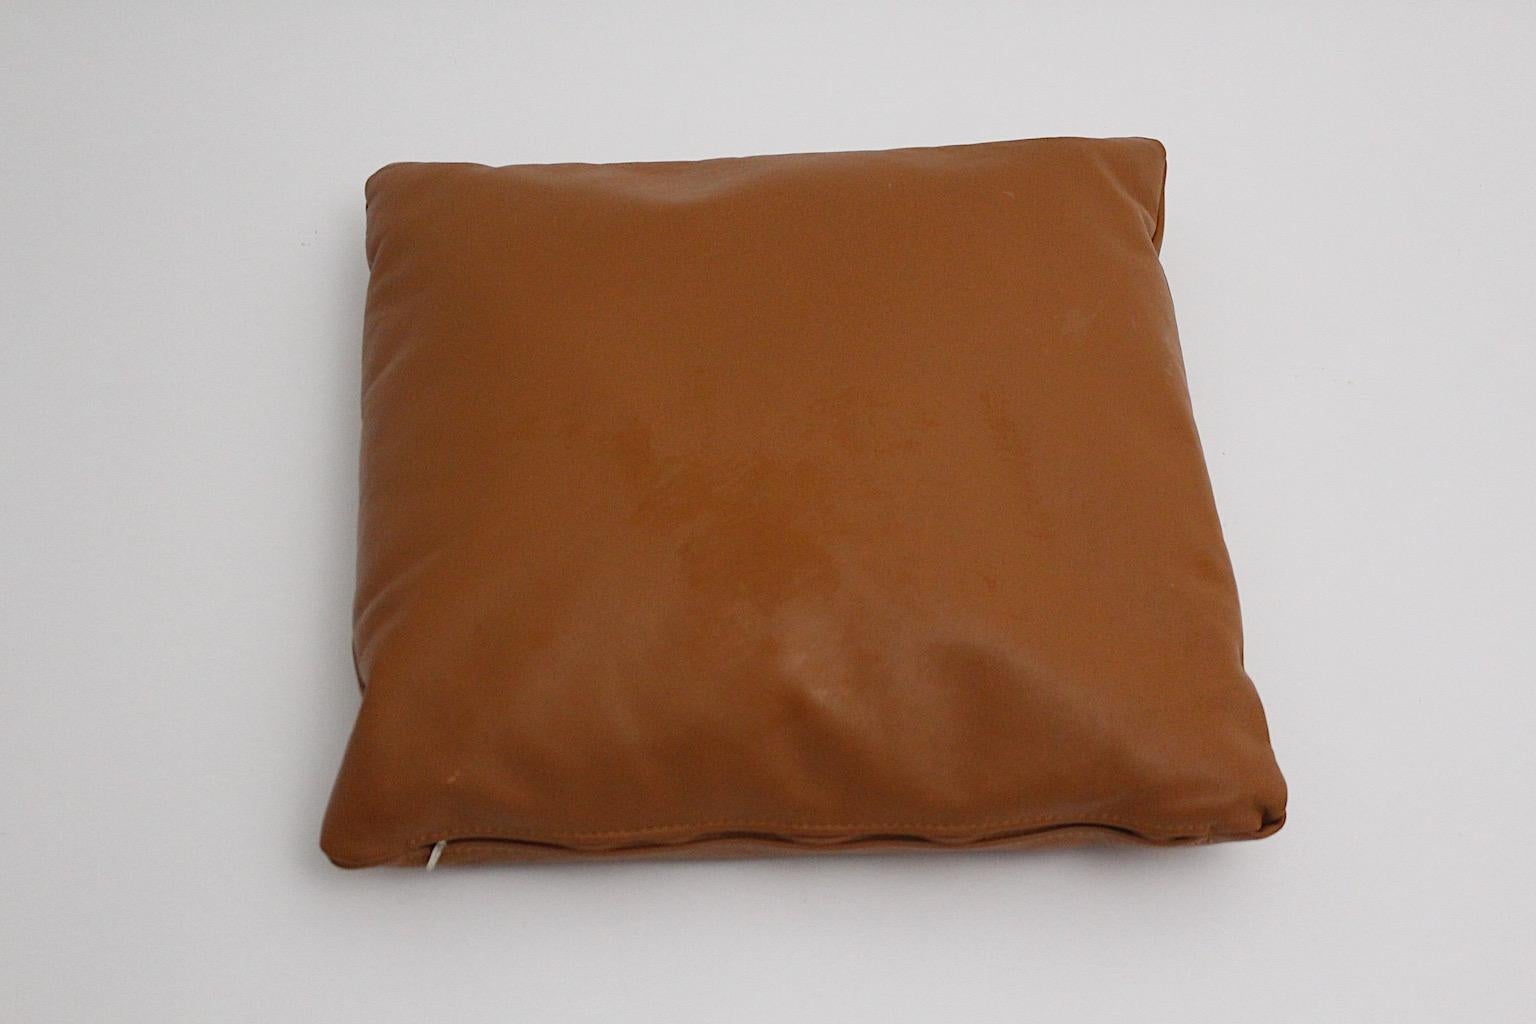 Brown Vintage Stitched Set of Three Leather Pillows, 1970s, Switzerland 1